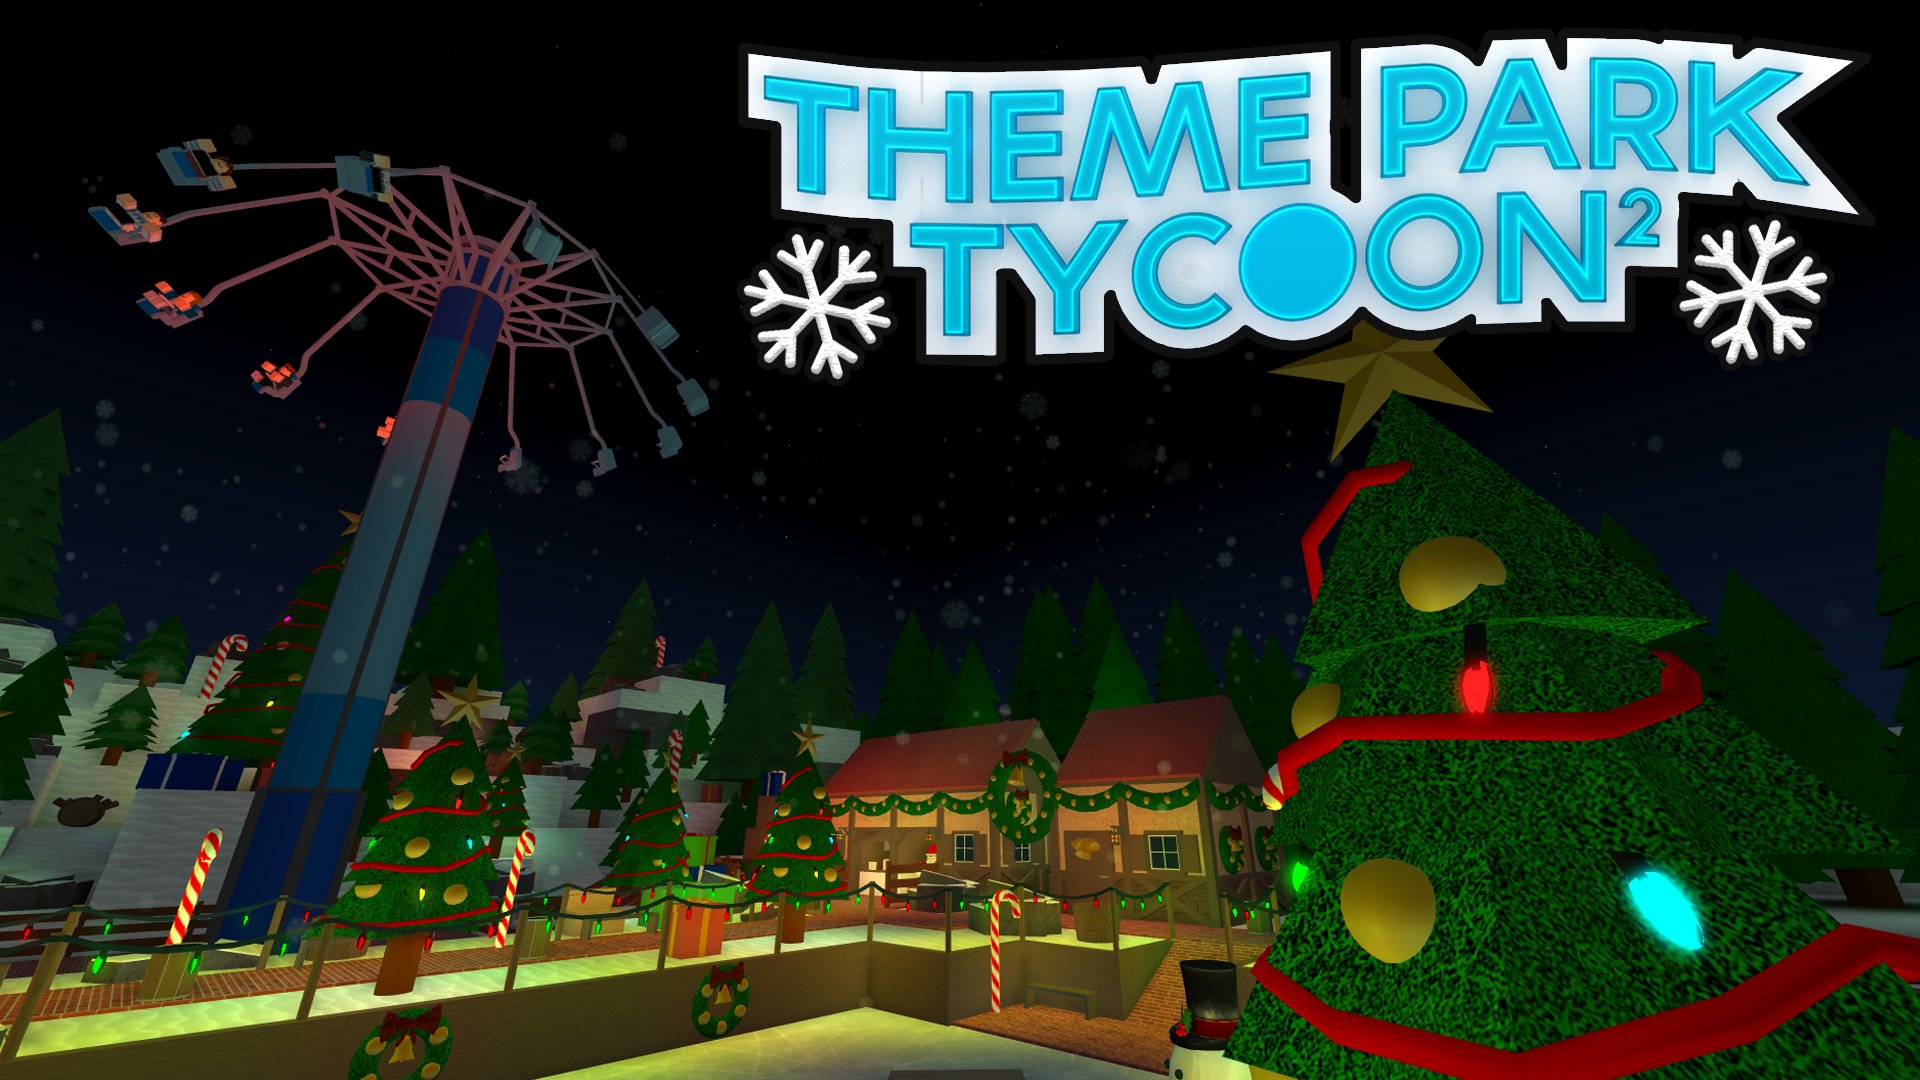 Dennis On Twitter Theme Park Tycoon 2 Its Christmas Update Is Now Live Featuring A New Ride A Bunch Of Christmas Decorations And More Https T Co Ntbpqejxlm Roblox Robloxdev Https T Co Uuaoslfmzb - roblox.com games 69184822 theme park tycoon 2